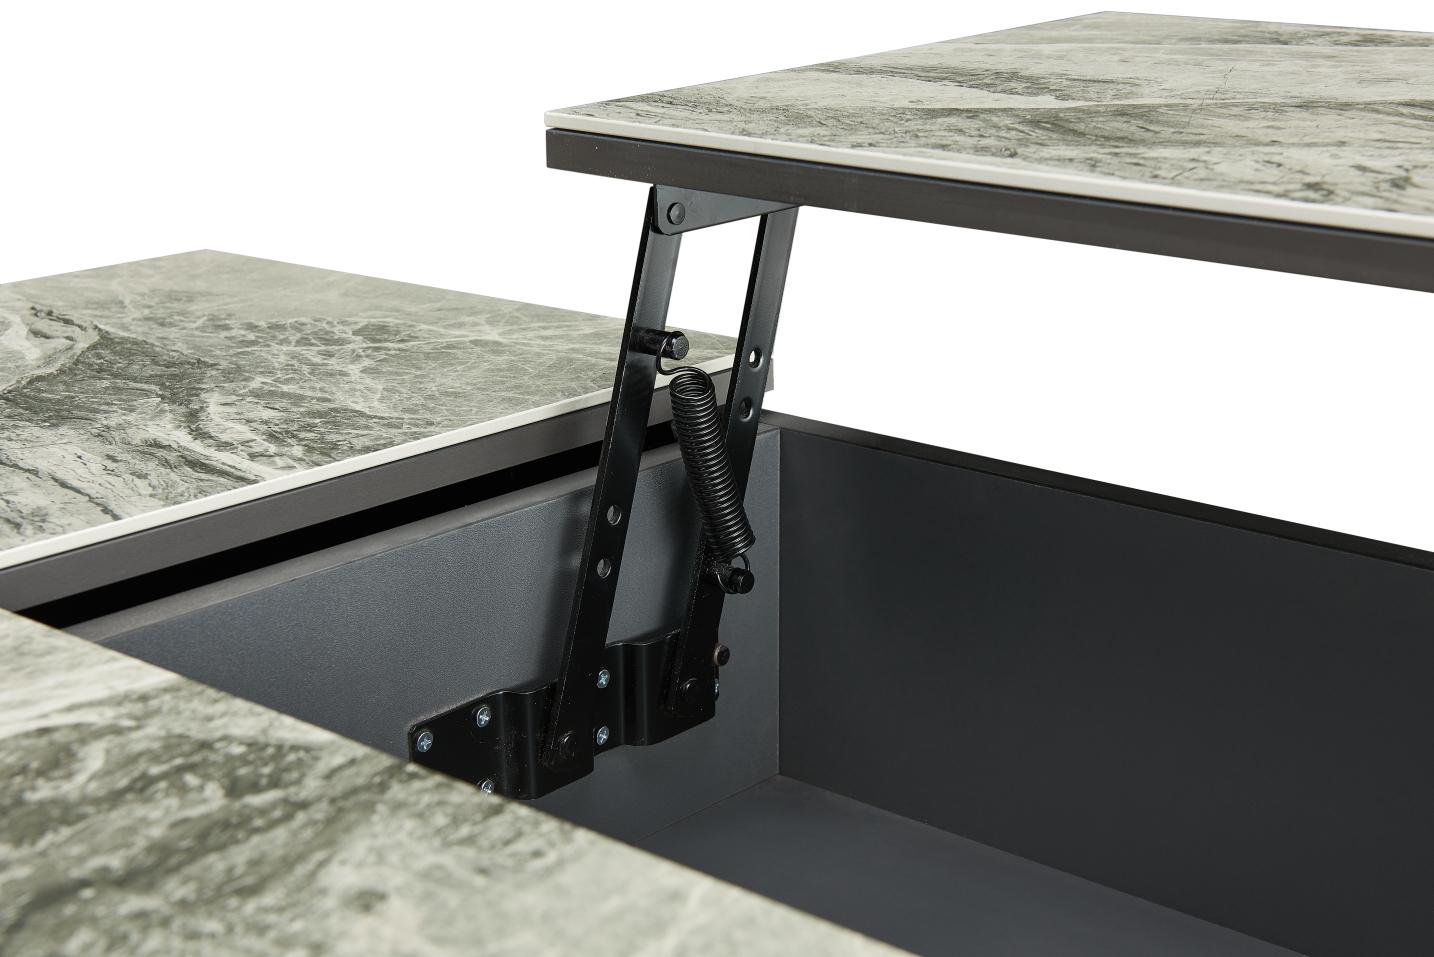 https://nyfurnitureoutlets.com/products/grey-marble-coffee-table-w-storage-made-in-italy-contemporary-460ct/1x1/434720-7-8586765301.jpg